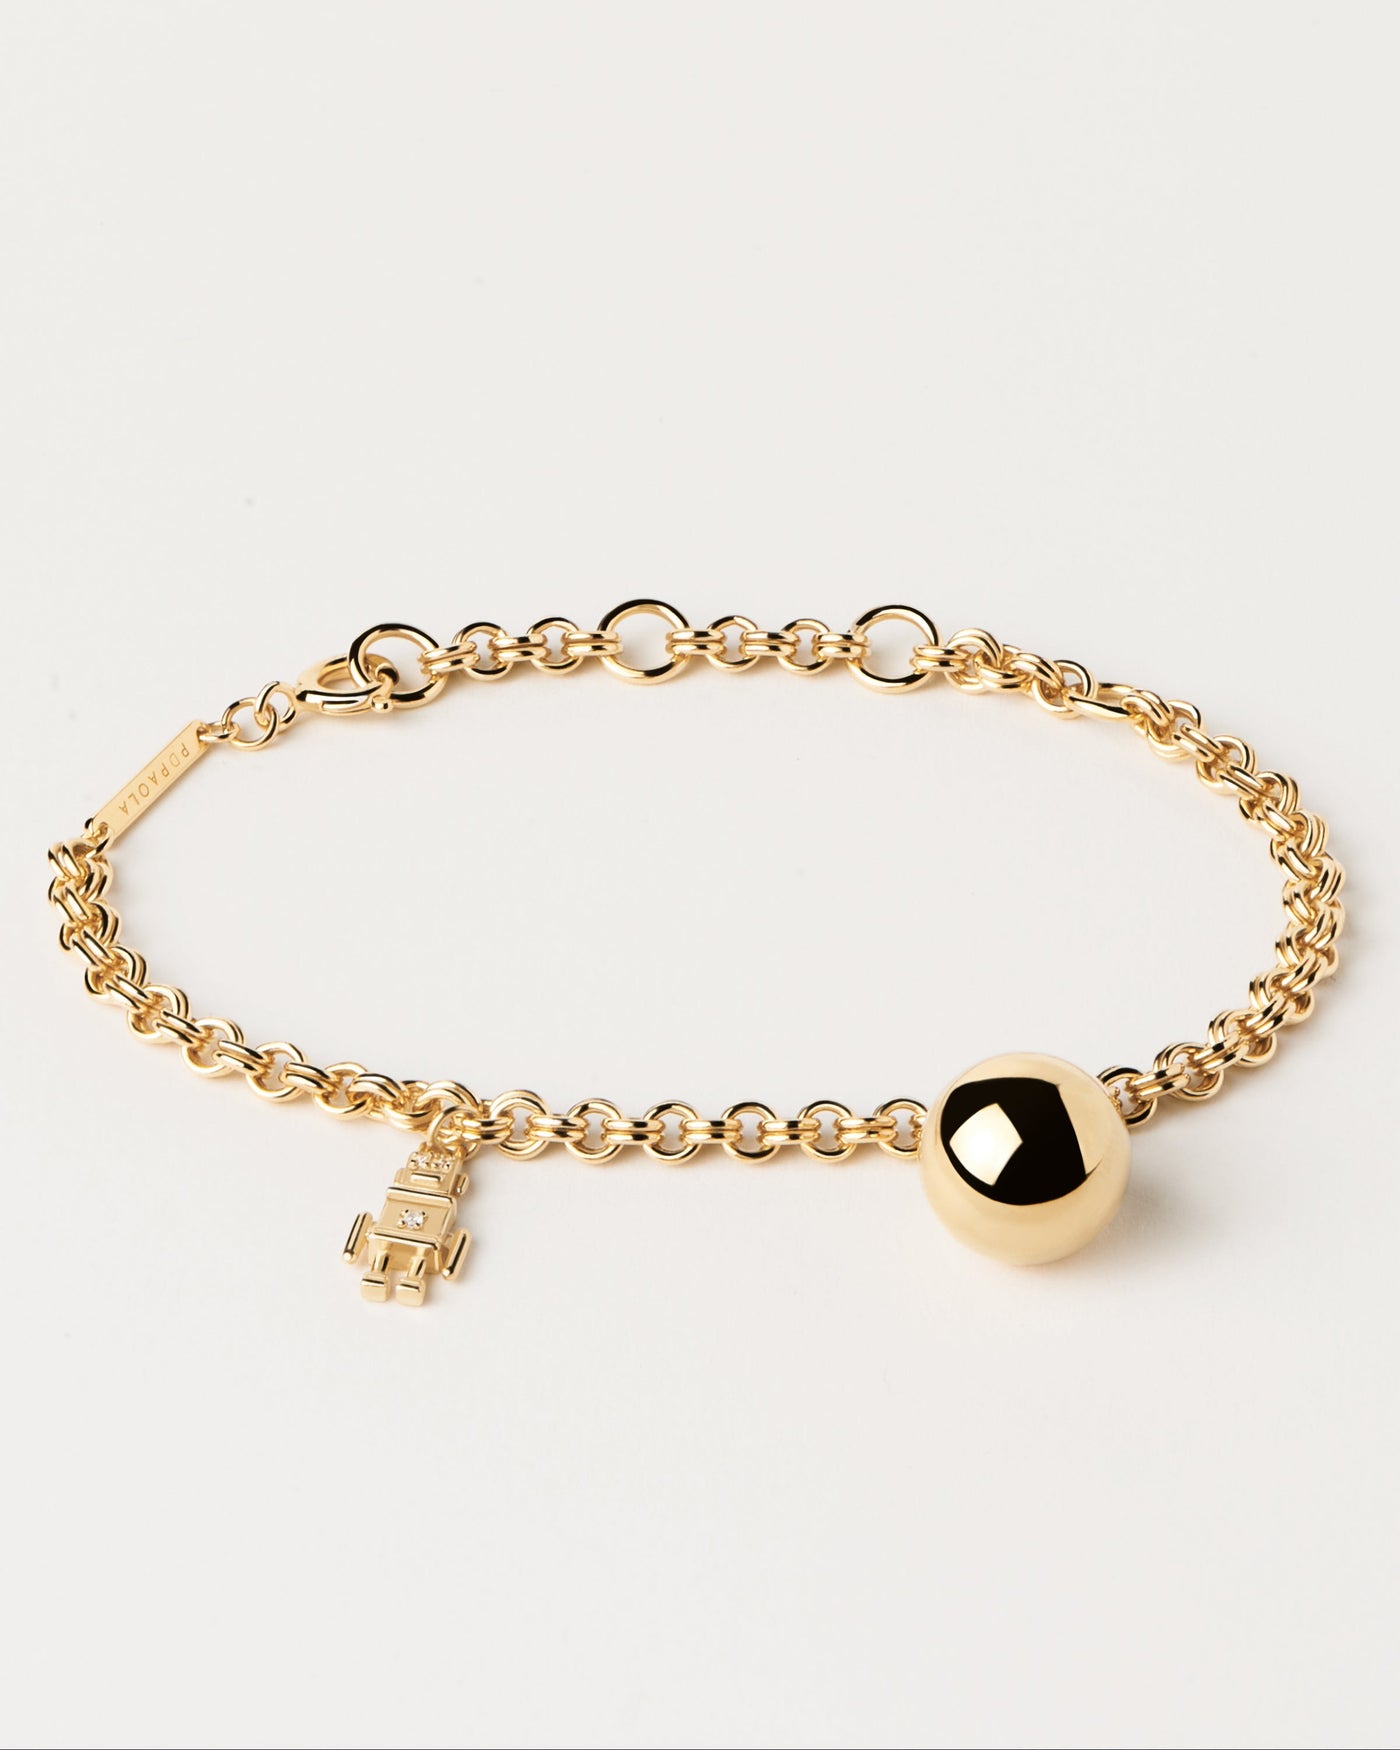 2023 Selection | Space Age Bracelet. Gold-plated silver chain bracelet with robot and ball motives. Get the latest arrival from PDPAOLA. Place your order safely and get this Best Seller. Free Shipping.